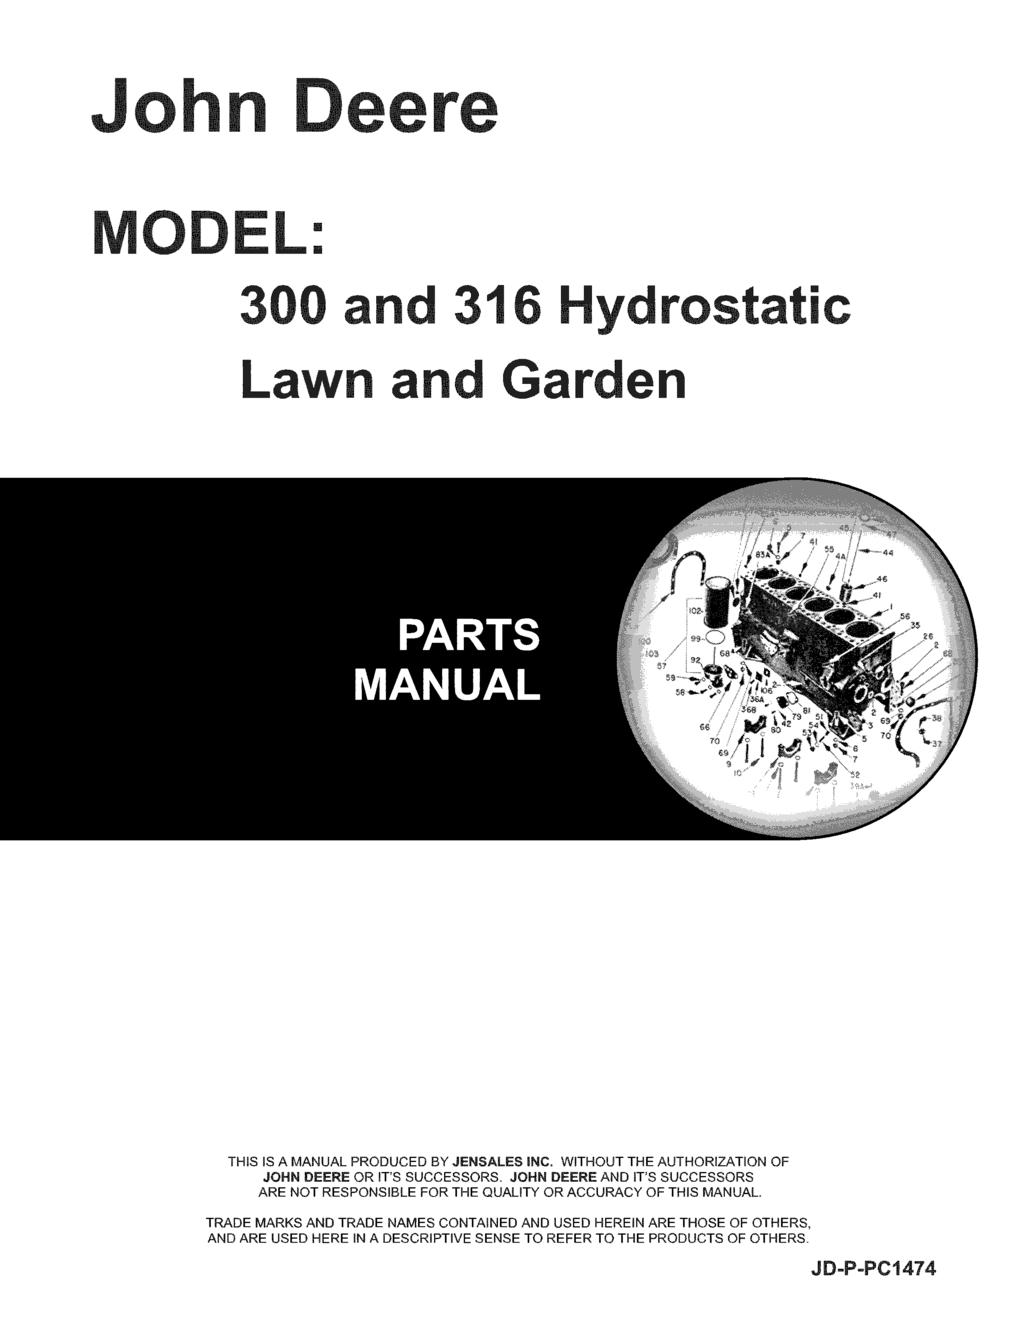 John Deere MODEL: 300 and 316 Hydrostatic Lawn and Garden THIS IS A MANUAL PRODUCED BY JENSALES INC. WITHOUT THE AUTHORIZATION OF JOHN DEERE OR IT'S SUCCESSORS.